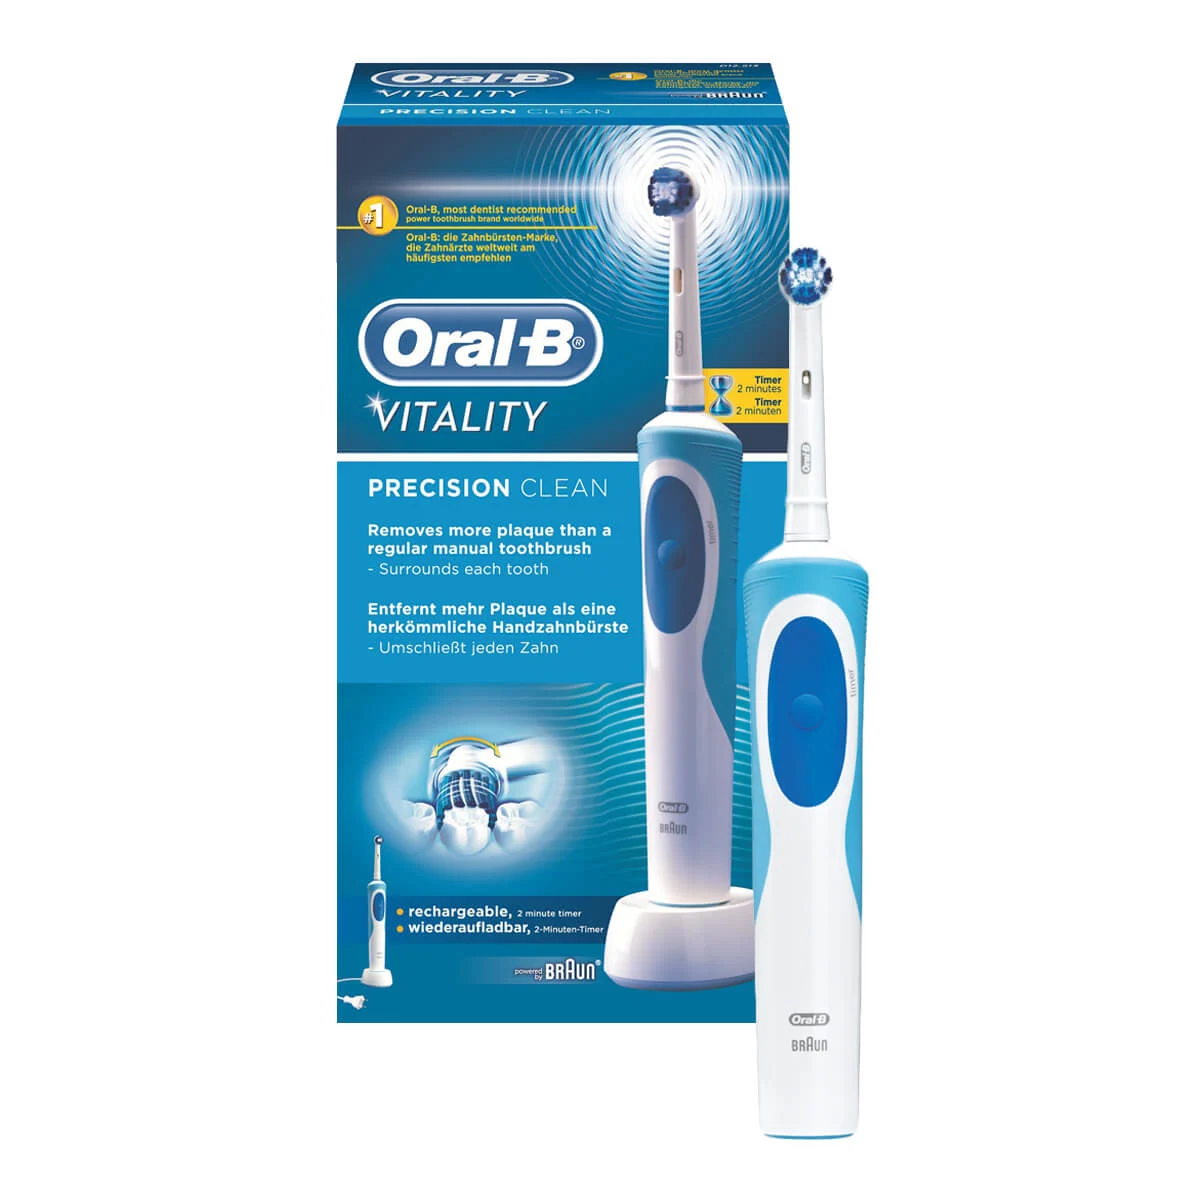 Oral-B Vitality Precision Clean Electric Toothbrush 